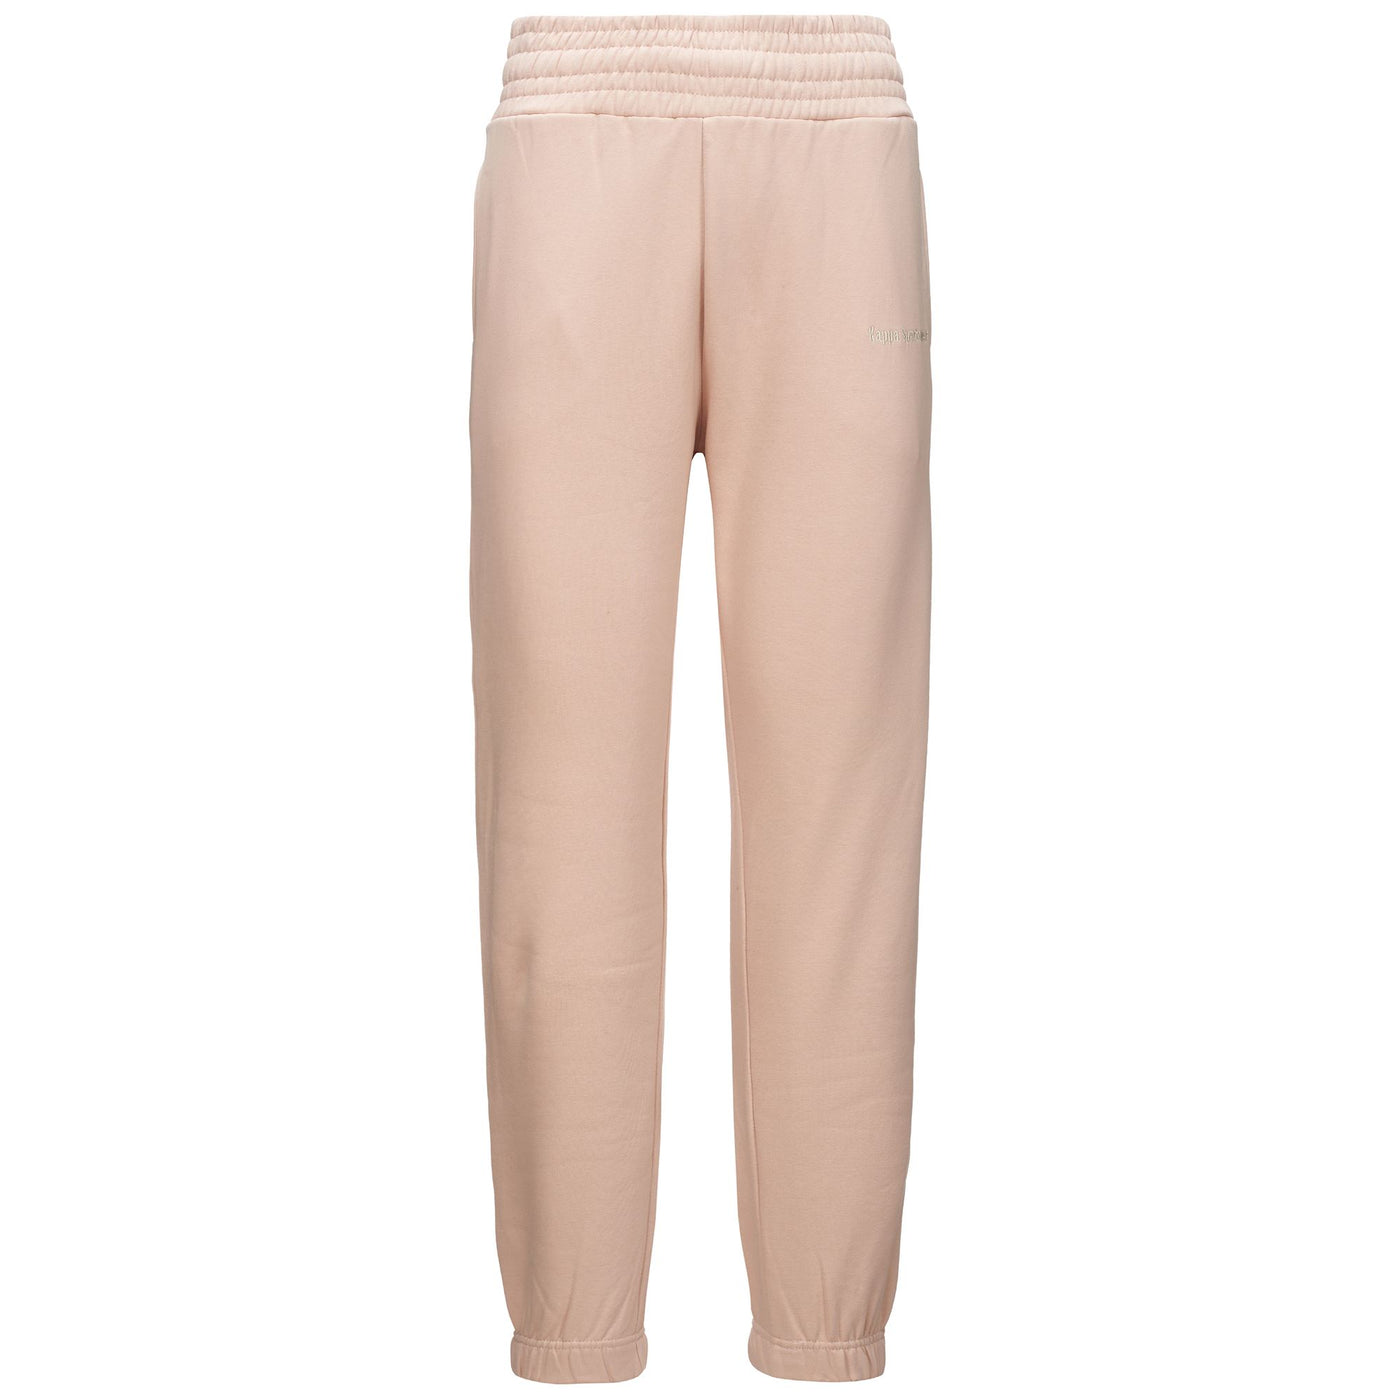 Pants Woman AUTHENTIC VEGHY Sport Trousers PINK SKIN - WHITE ASPARAGUS Photo (jpg Rgb)			